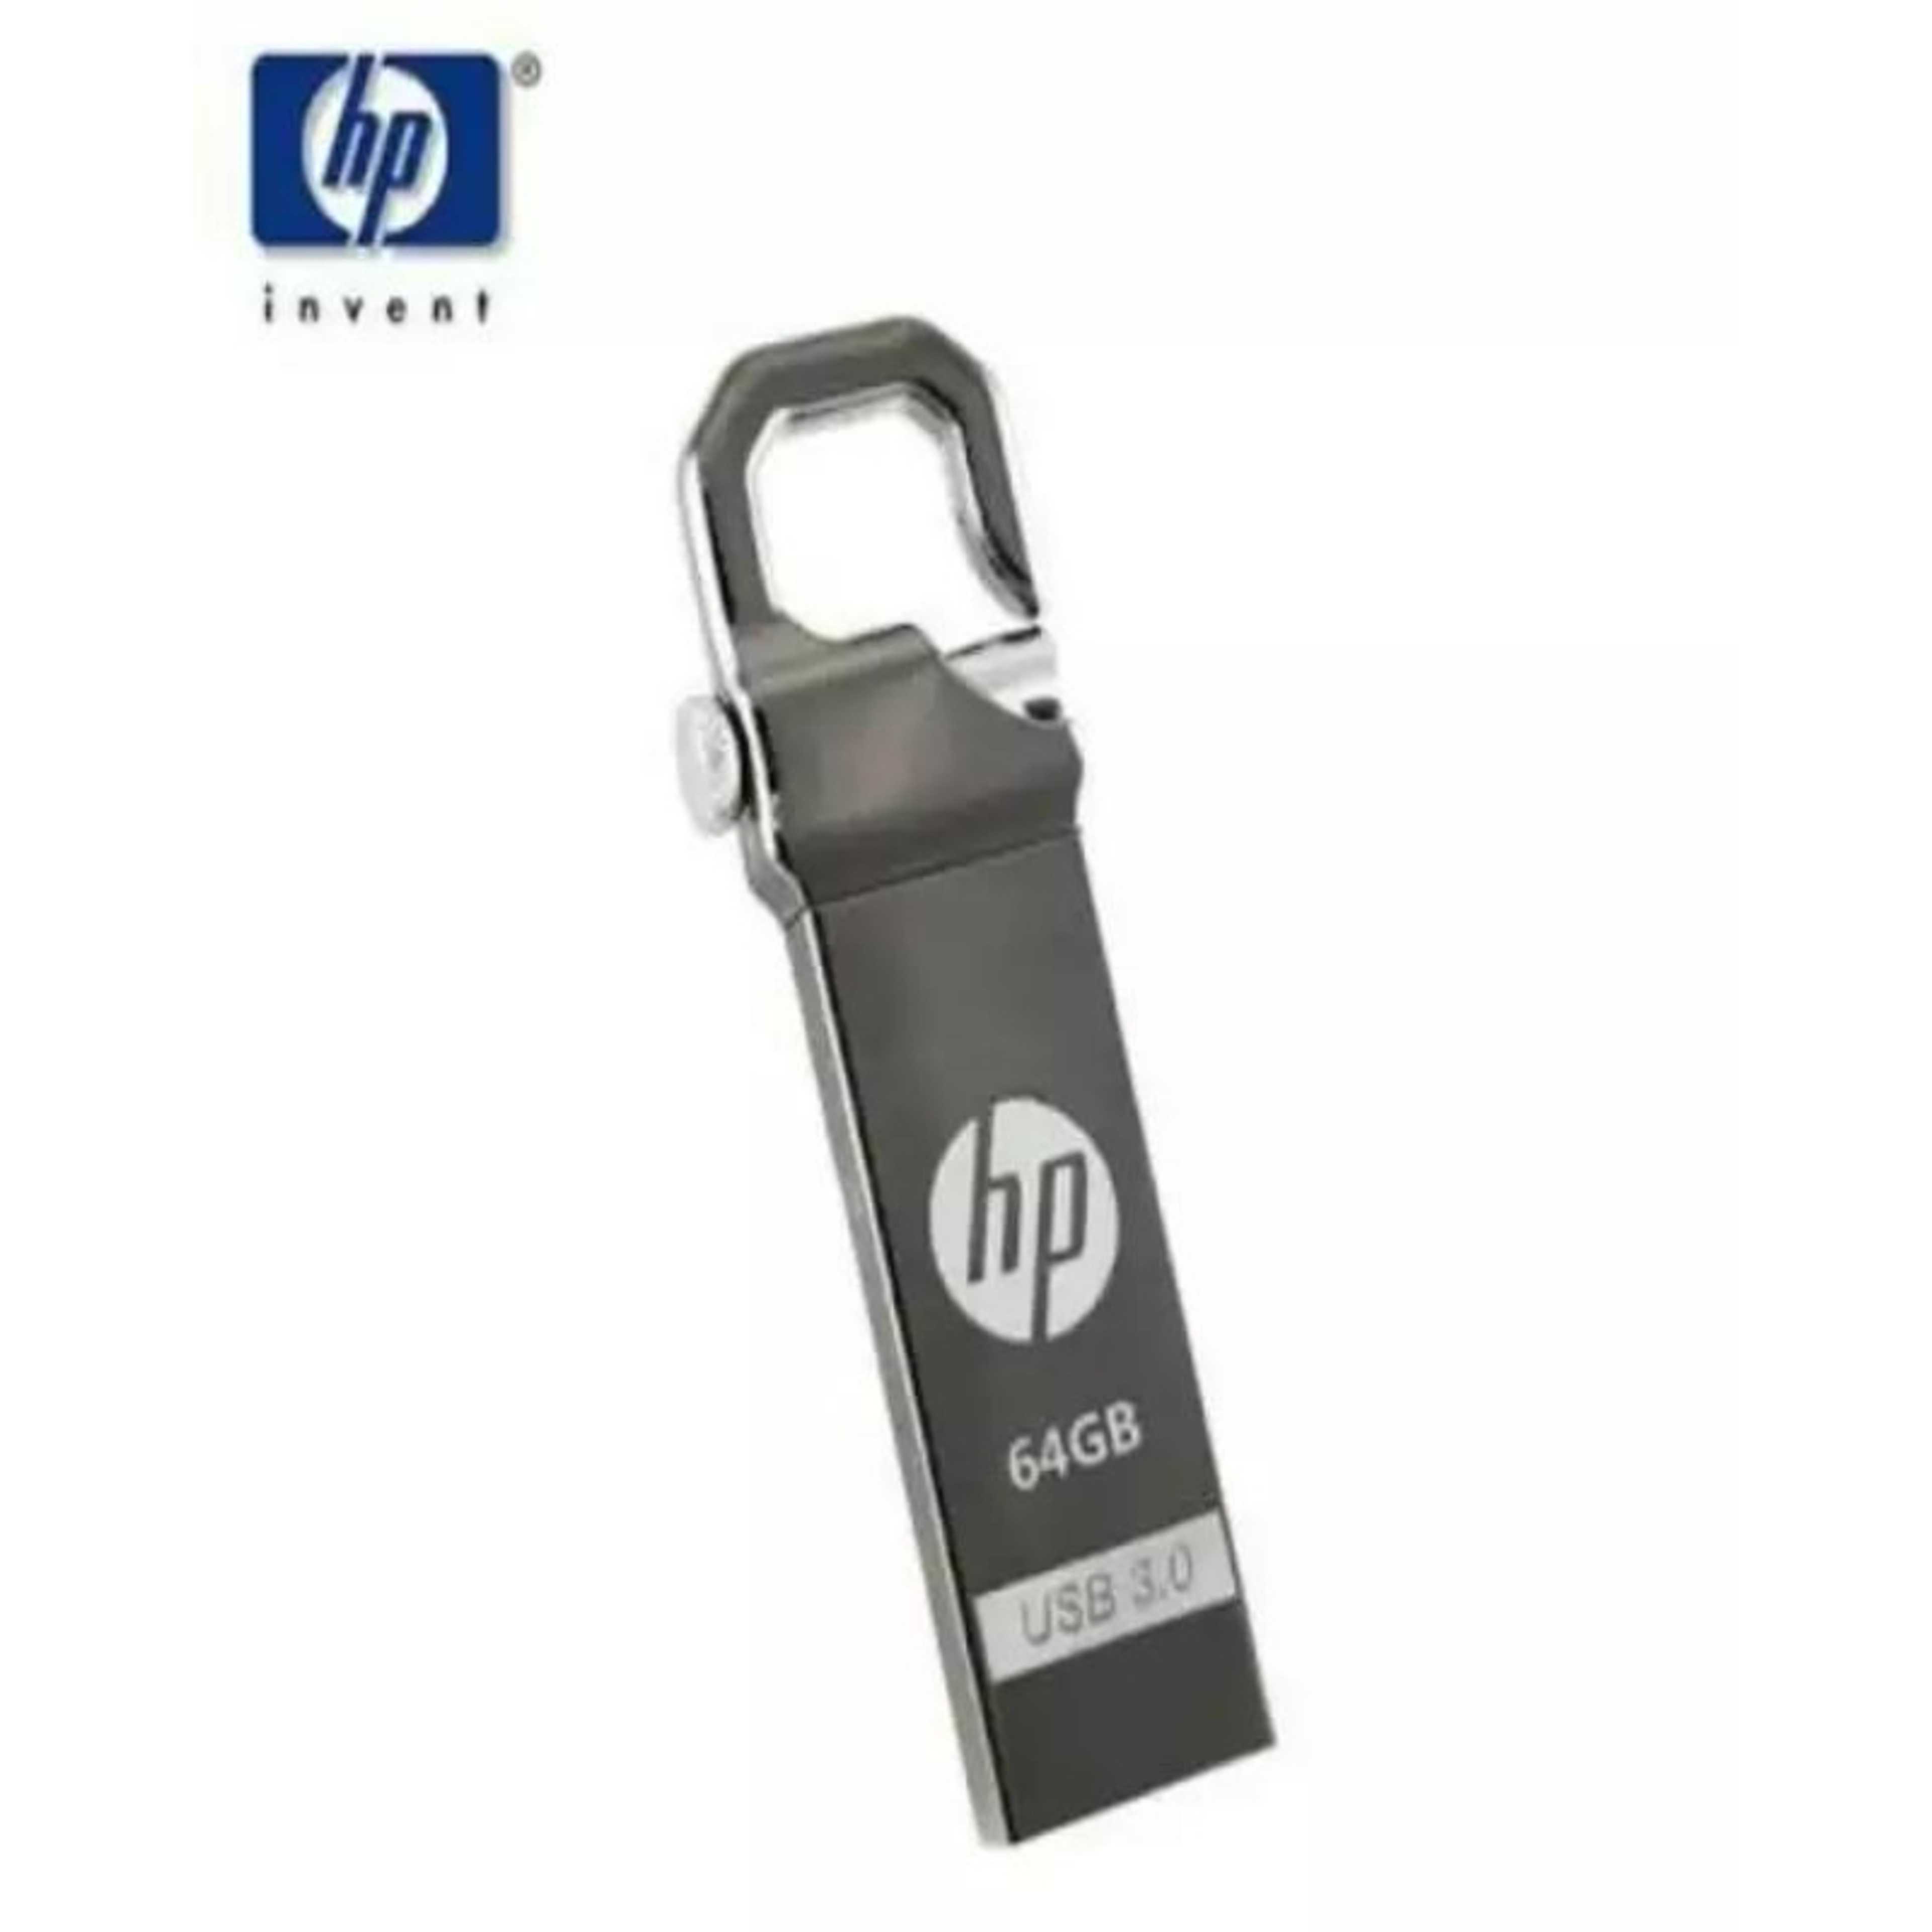 Original HP 64 GB Flash Drive with 6 Month warranty